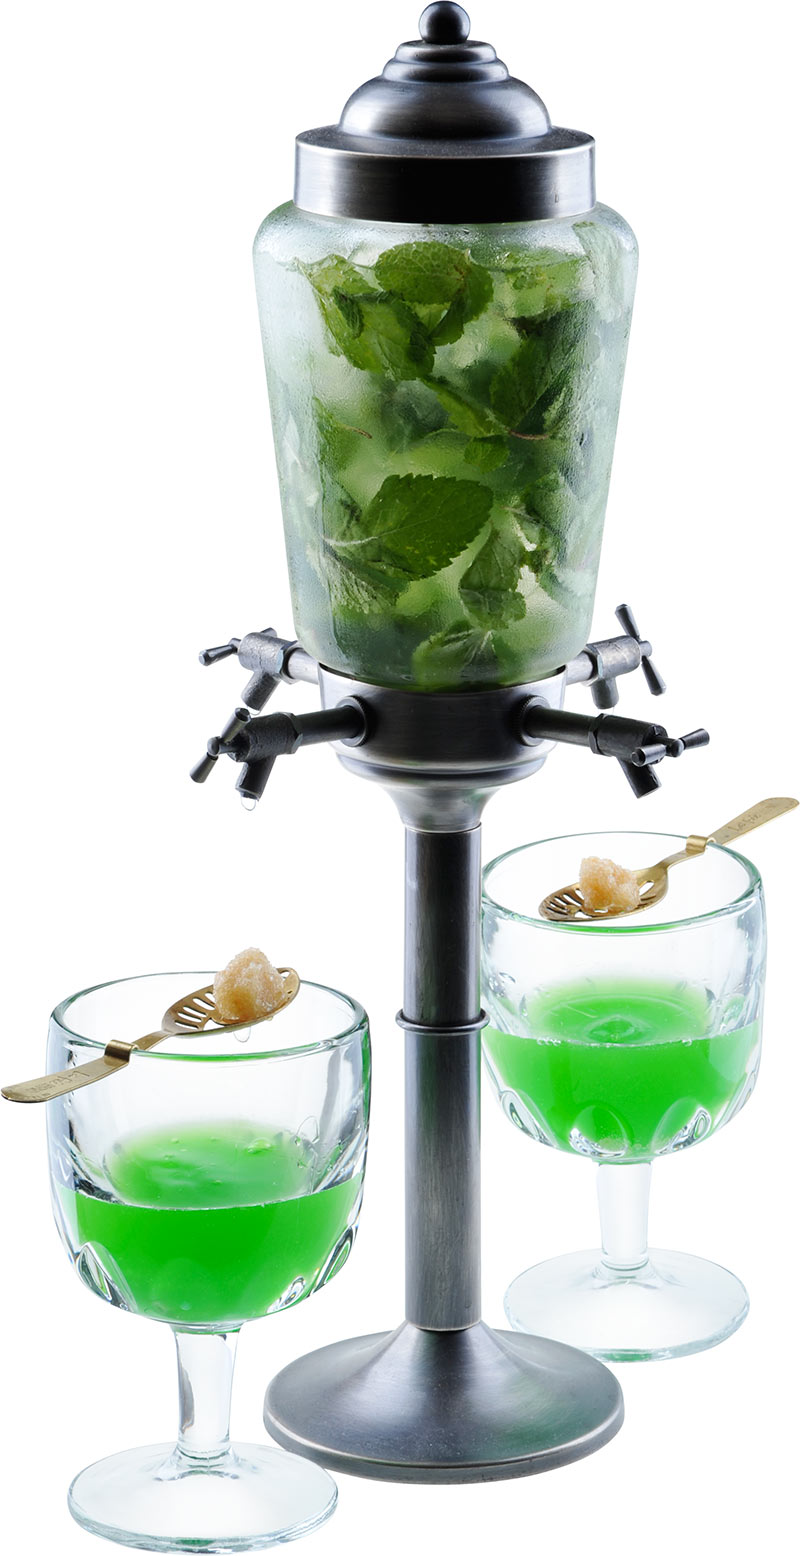 How to Make the Fountain with Absinthe